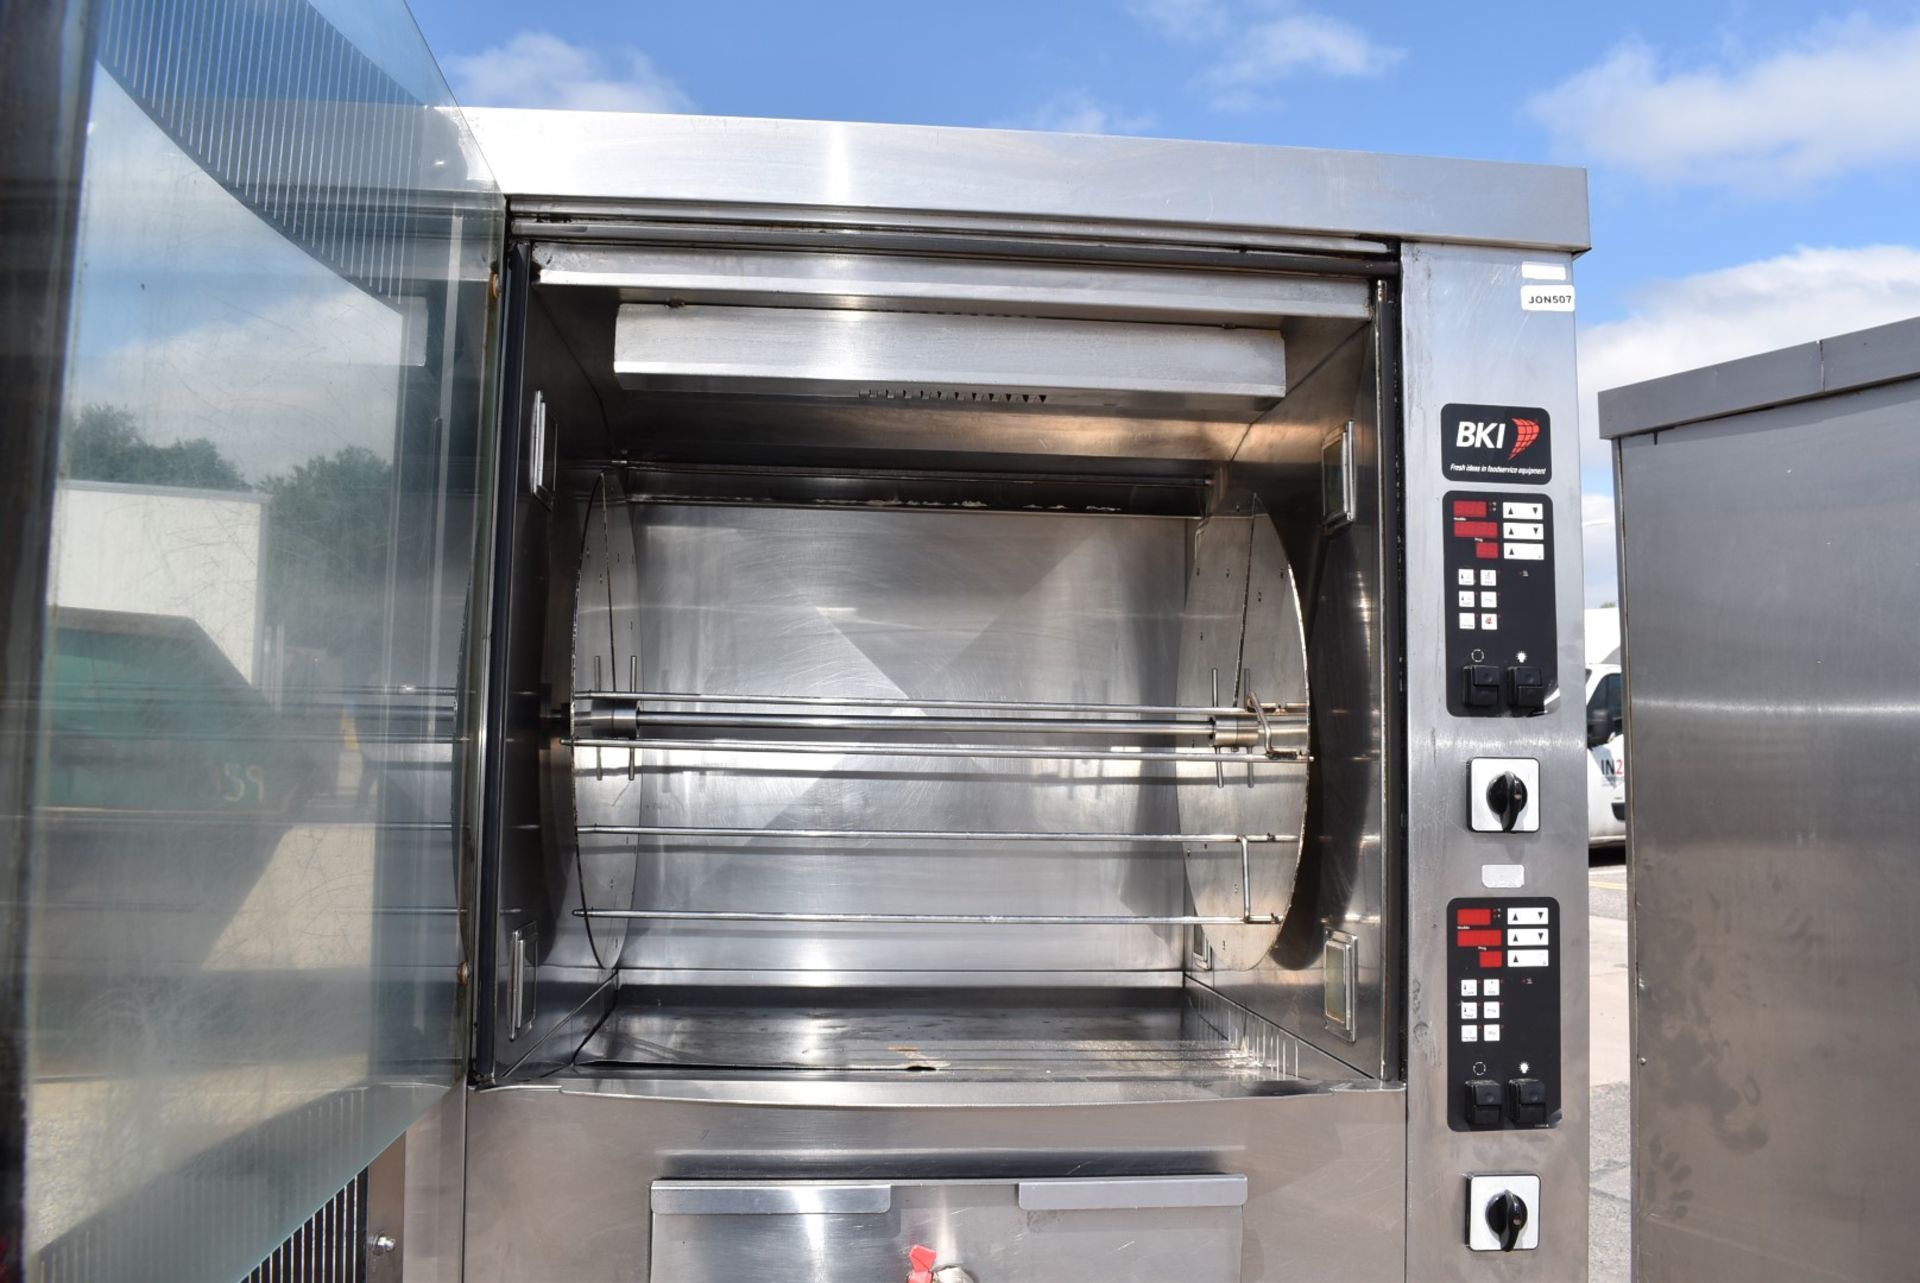 1 x BKI BBQ King Commercial Double Rotisserie Chicken Oven With Stand - Type VGUK16 - 3 Phase - Image 6 of 21